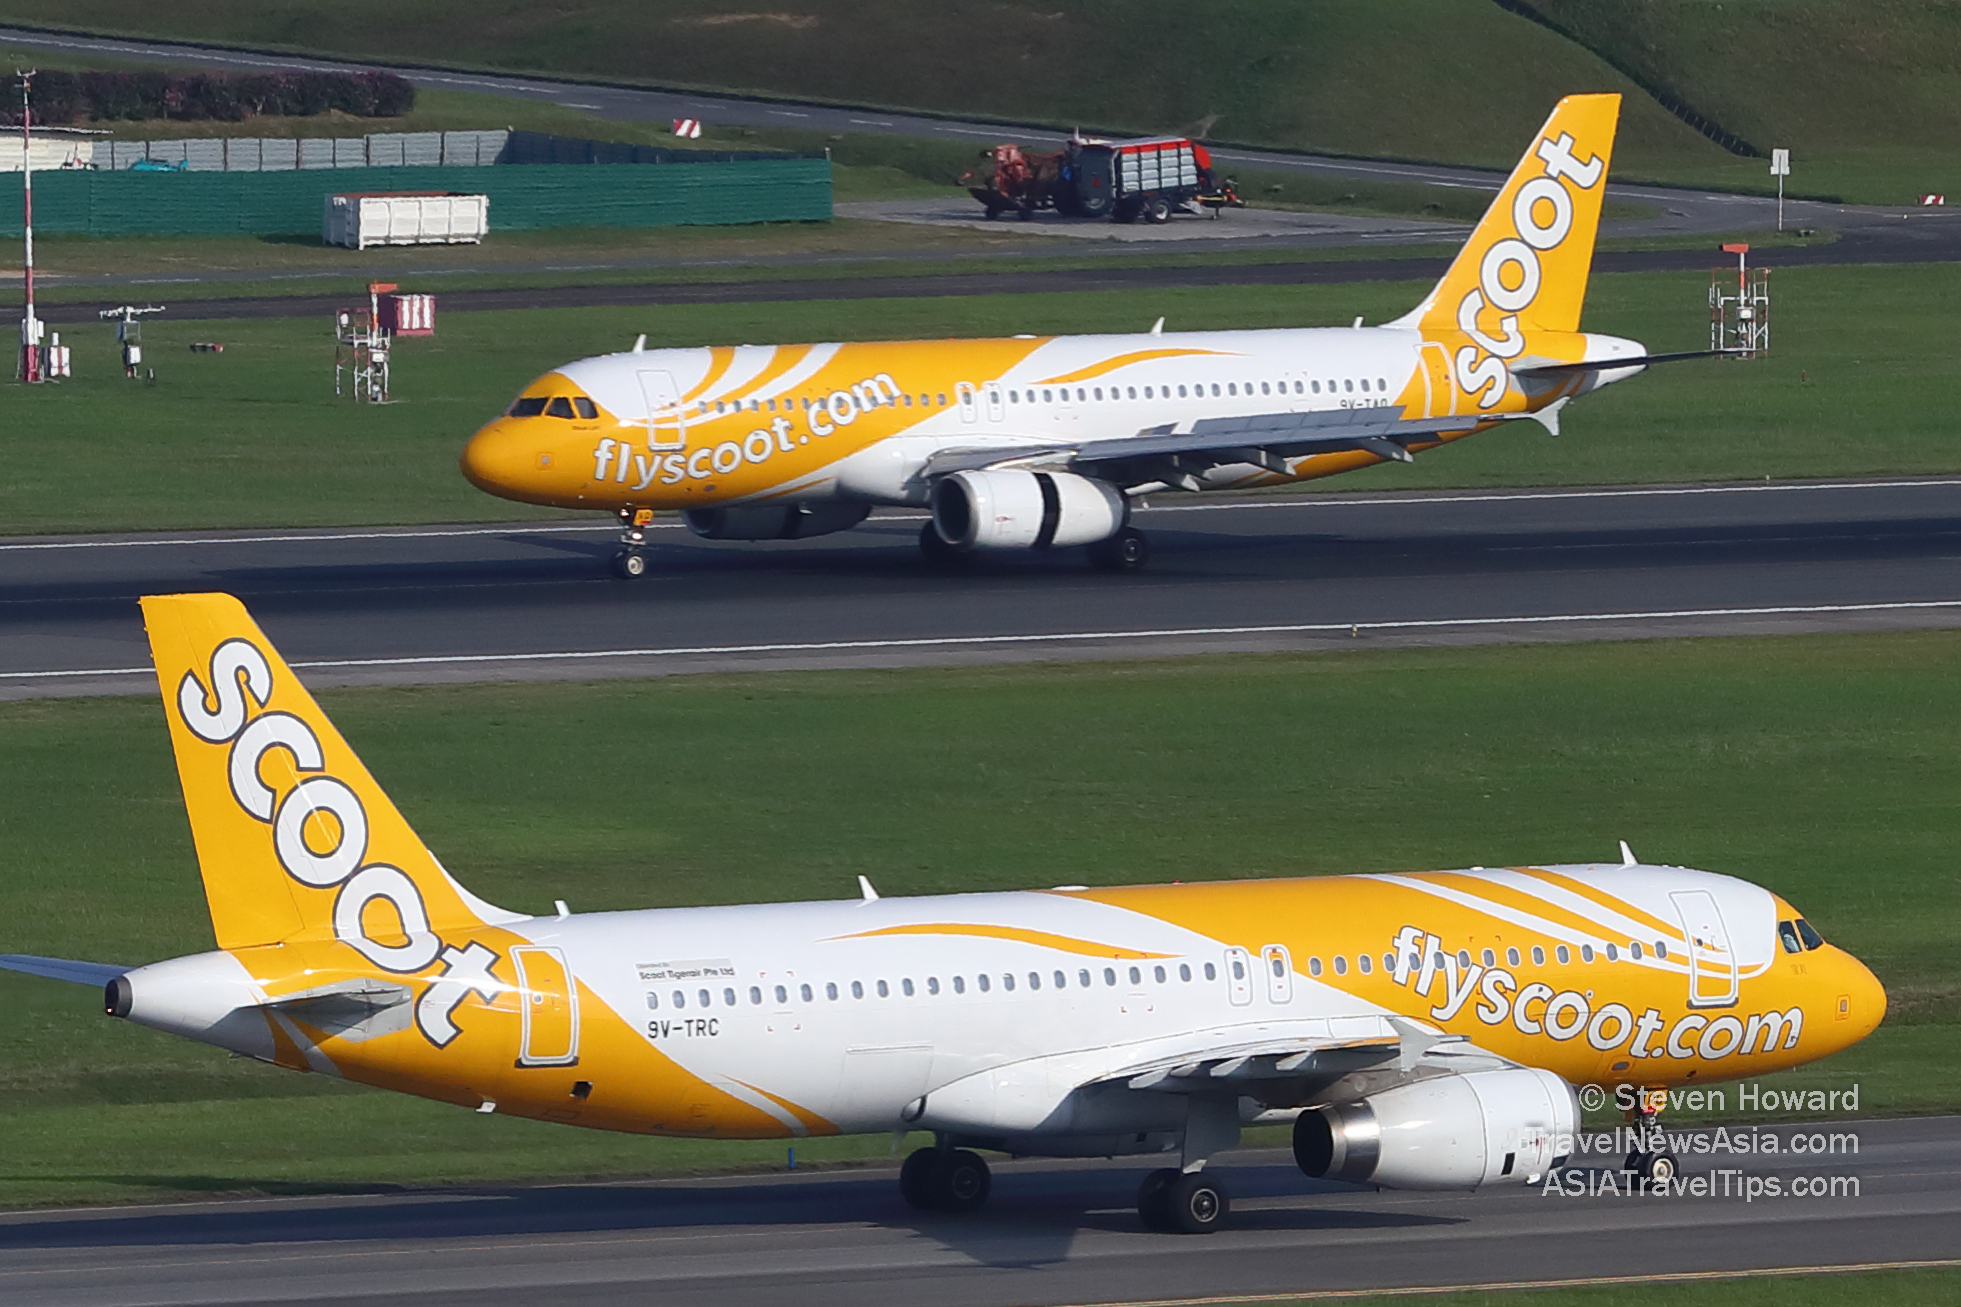 Scoot aircraft at Changi Airport in Singapore in September 2018. Picture taken by Steven Howard of TravelNewsAsia.com Click to enlarge.